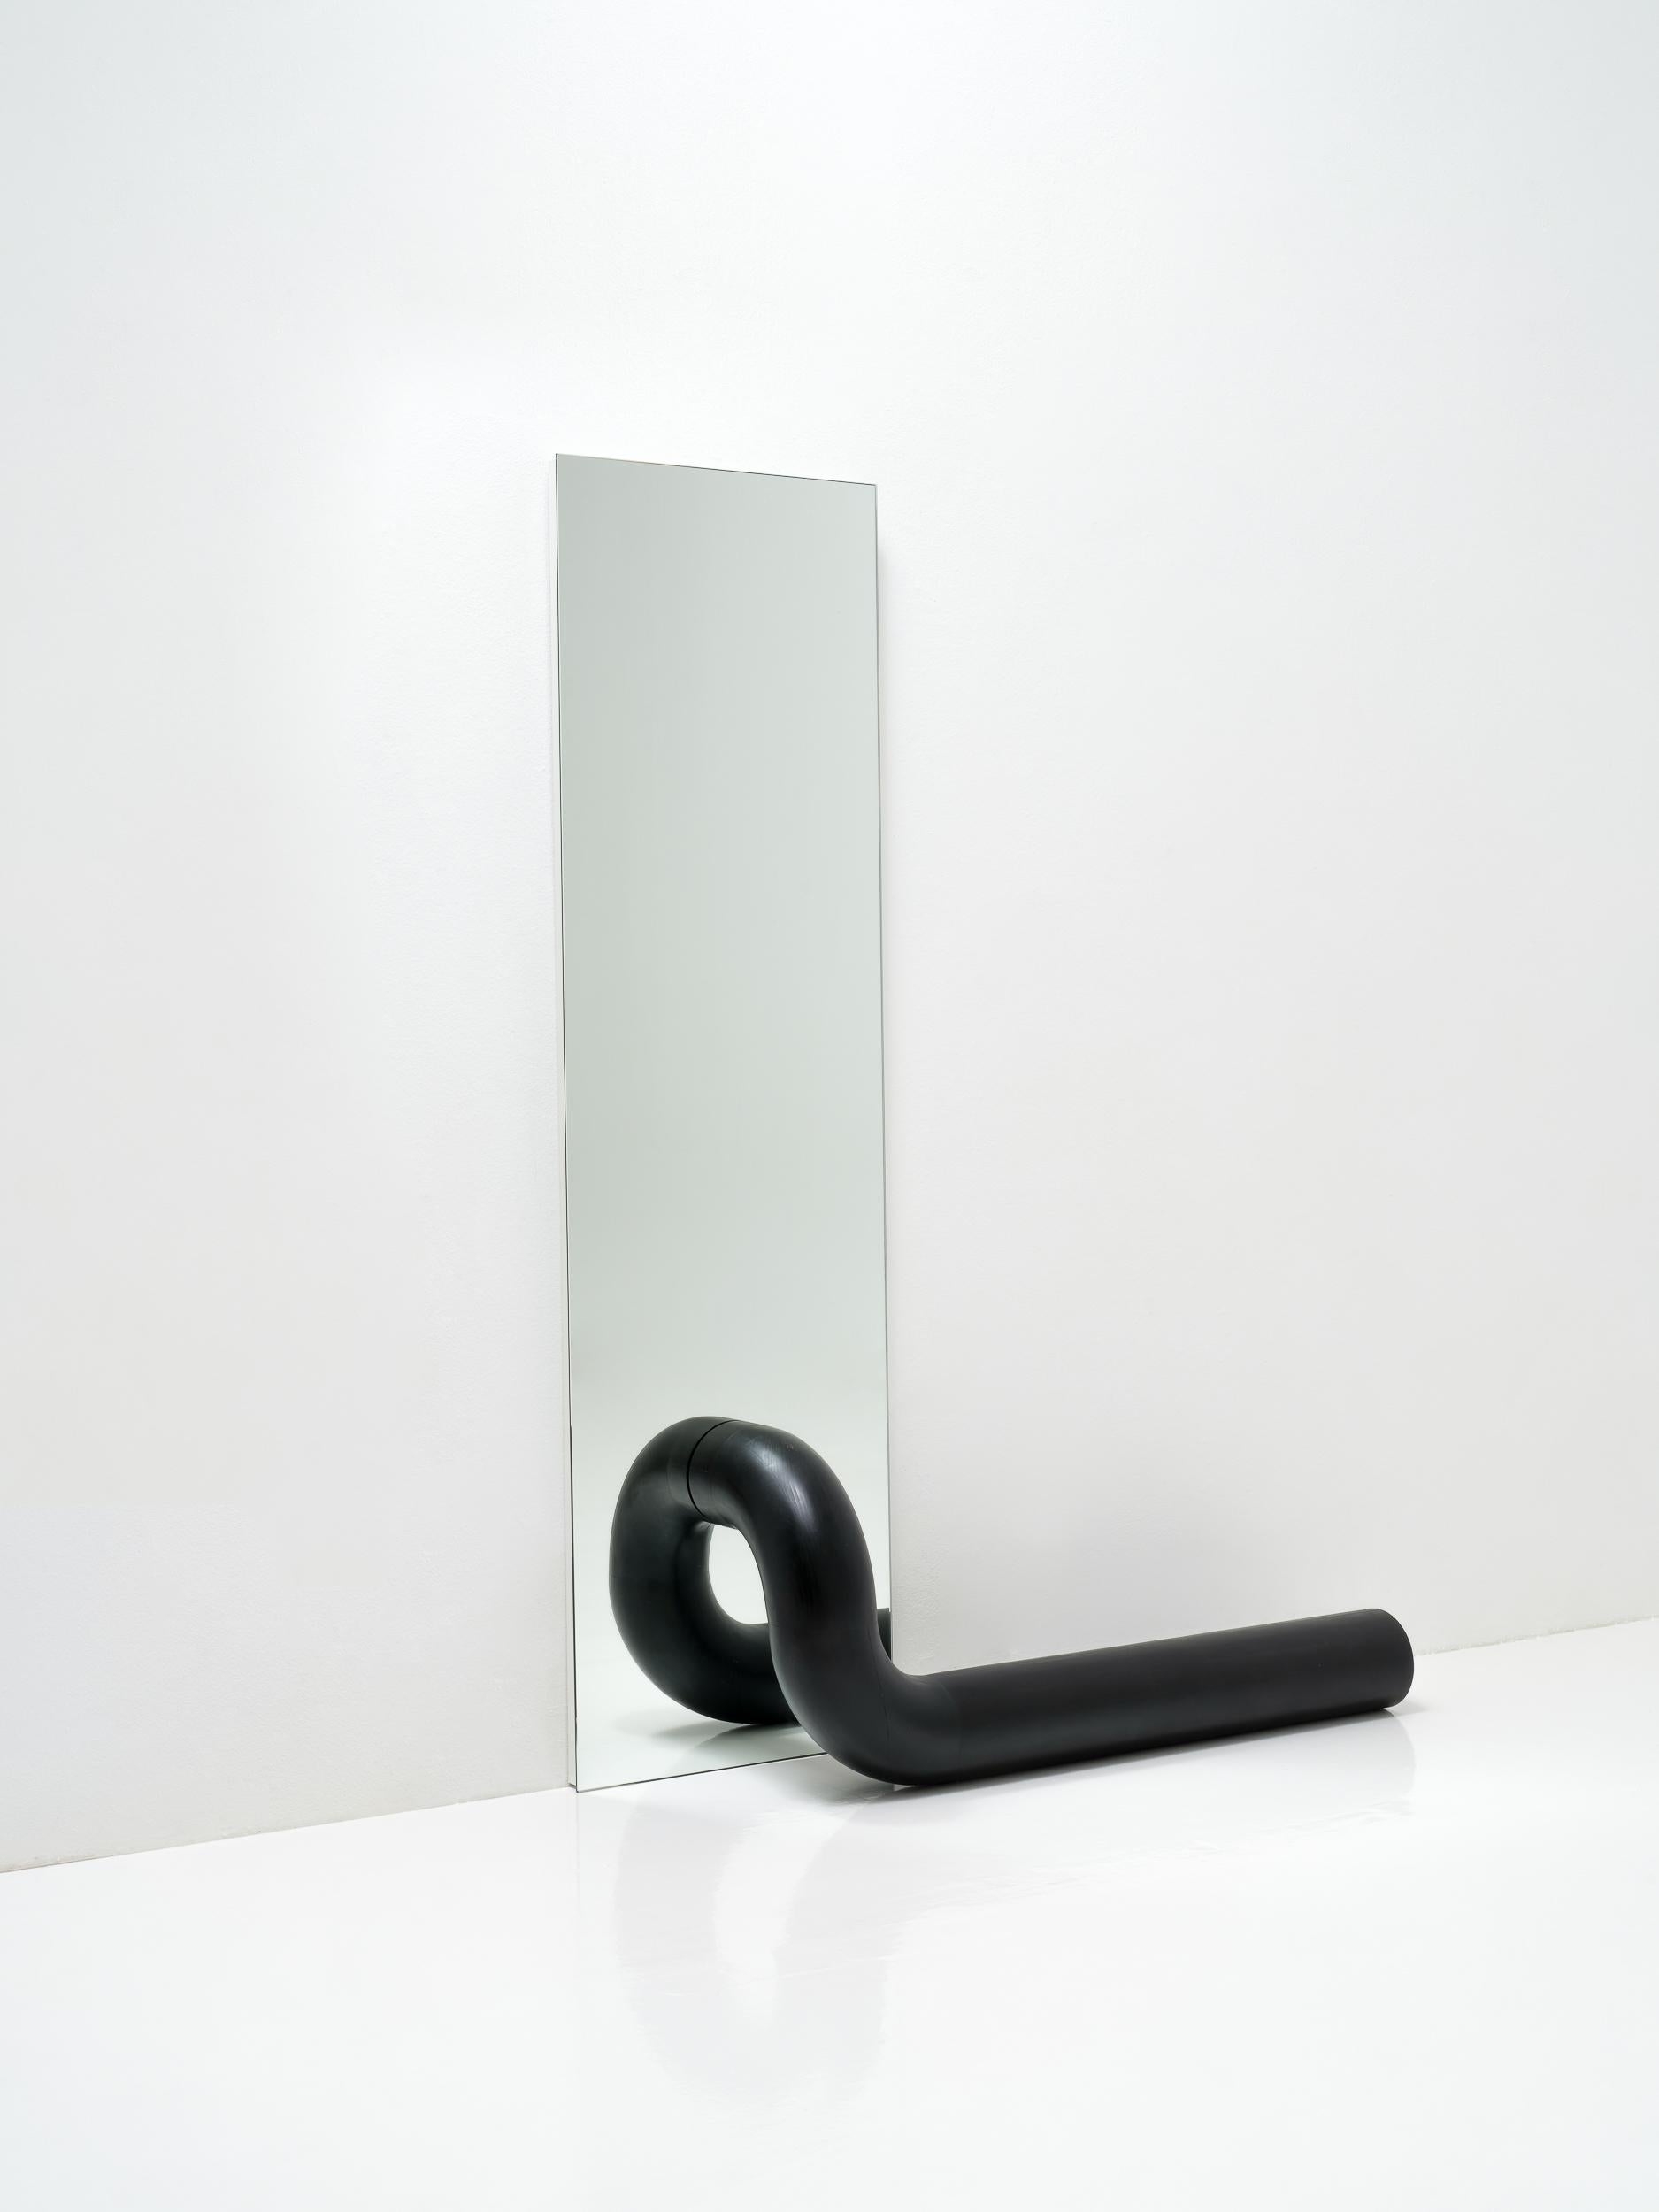 Korean Contemporary Minimal Time of Action Mirror in Glass and Black Wood For Sale